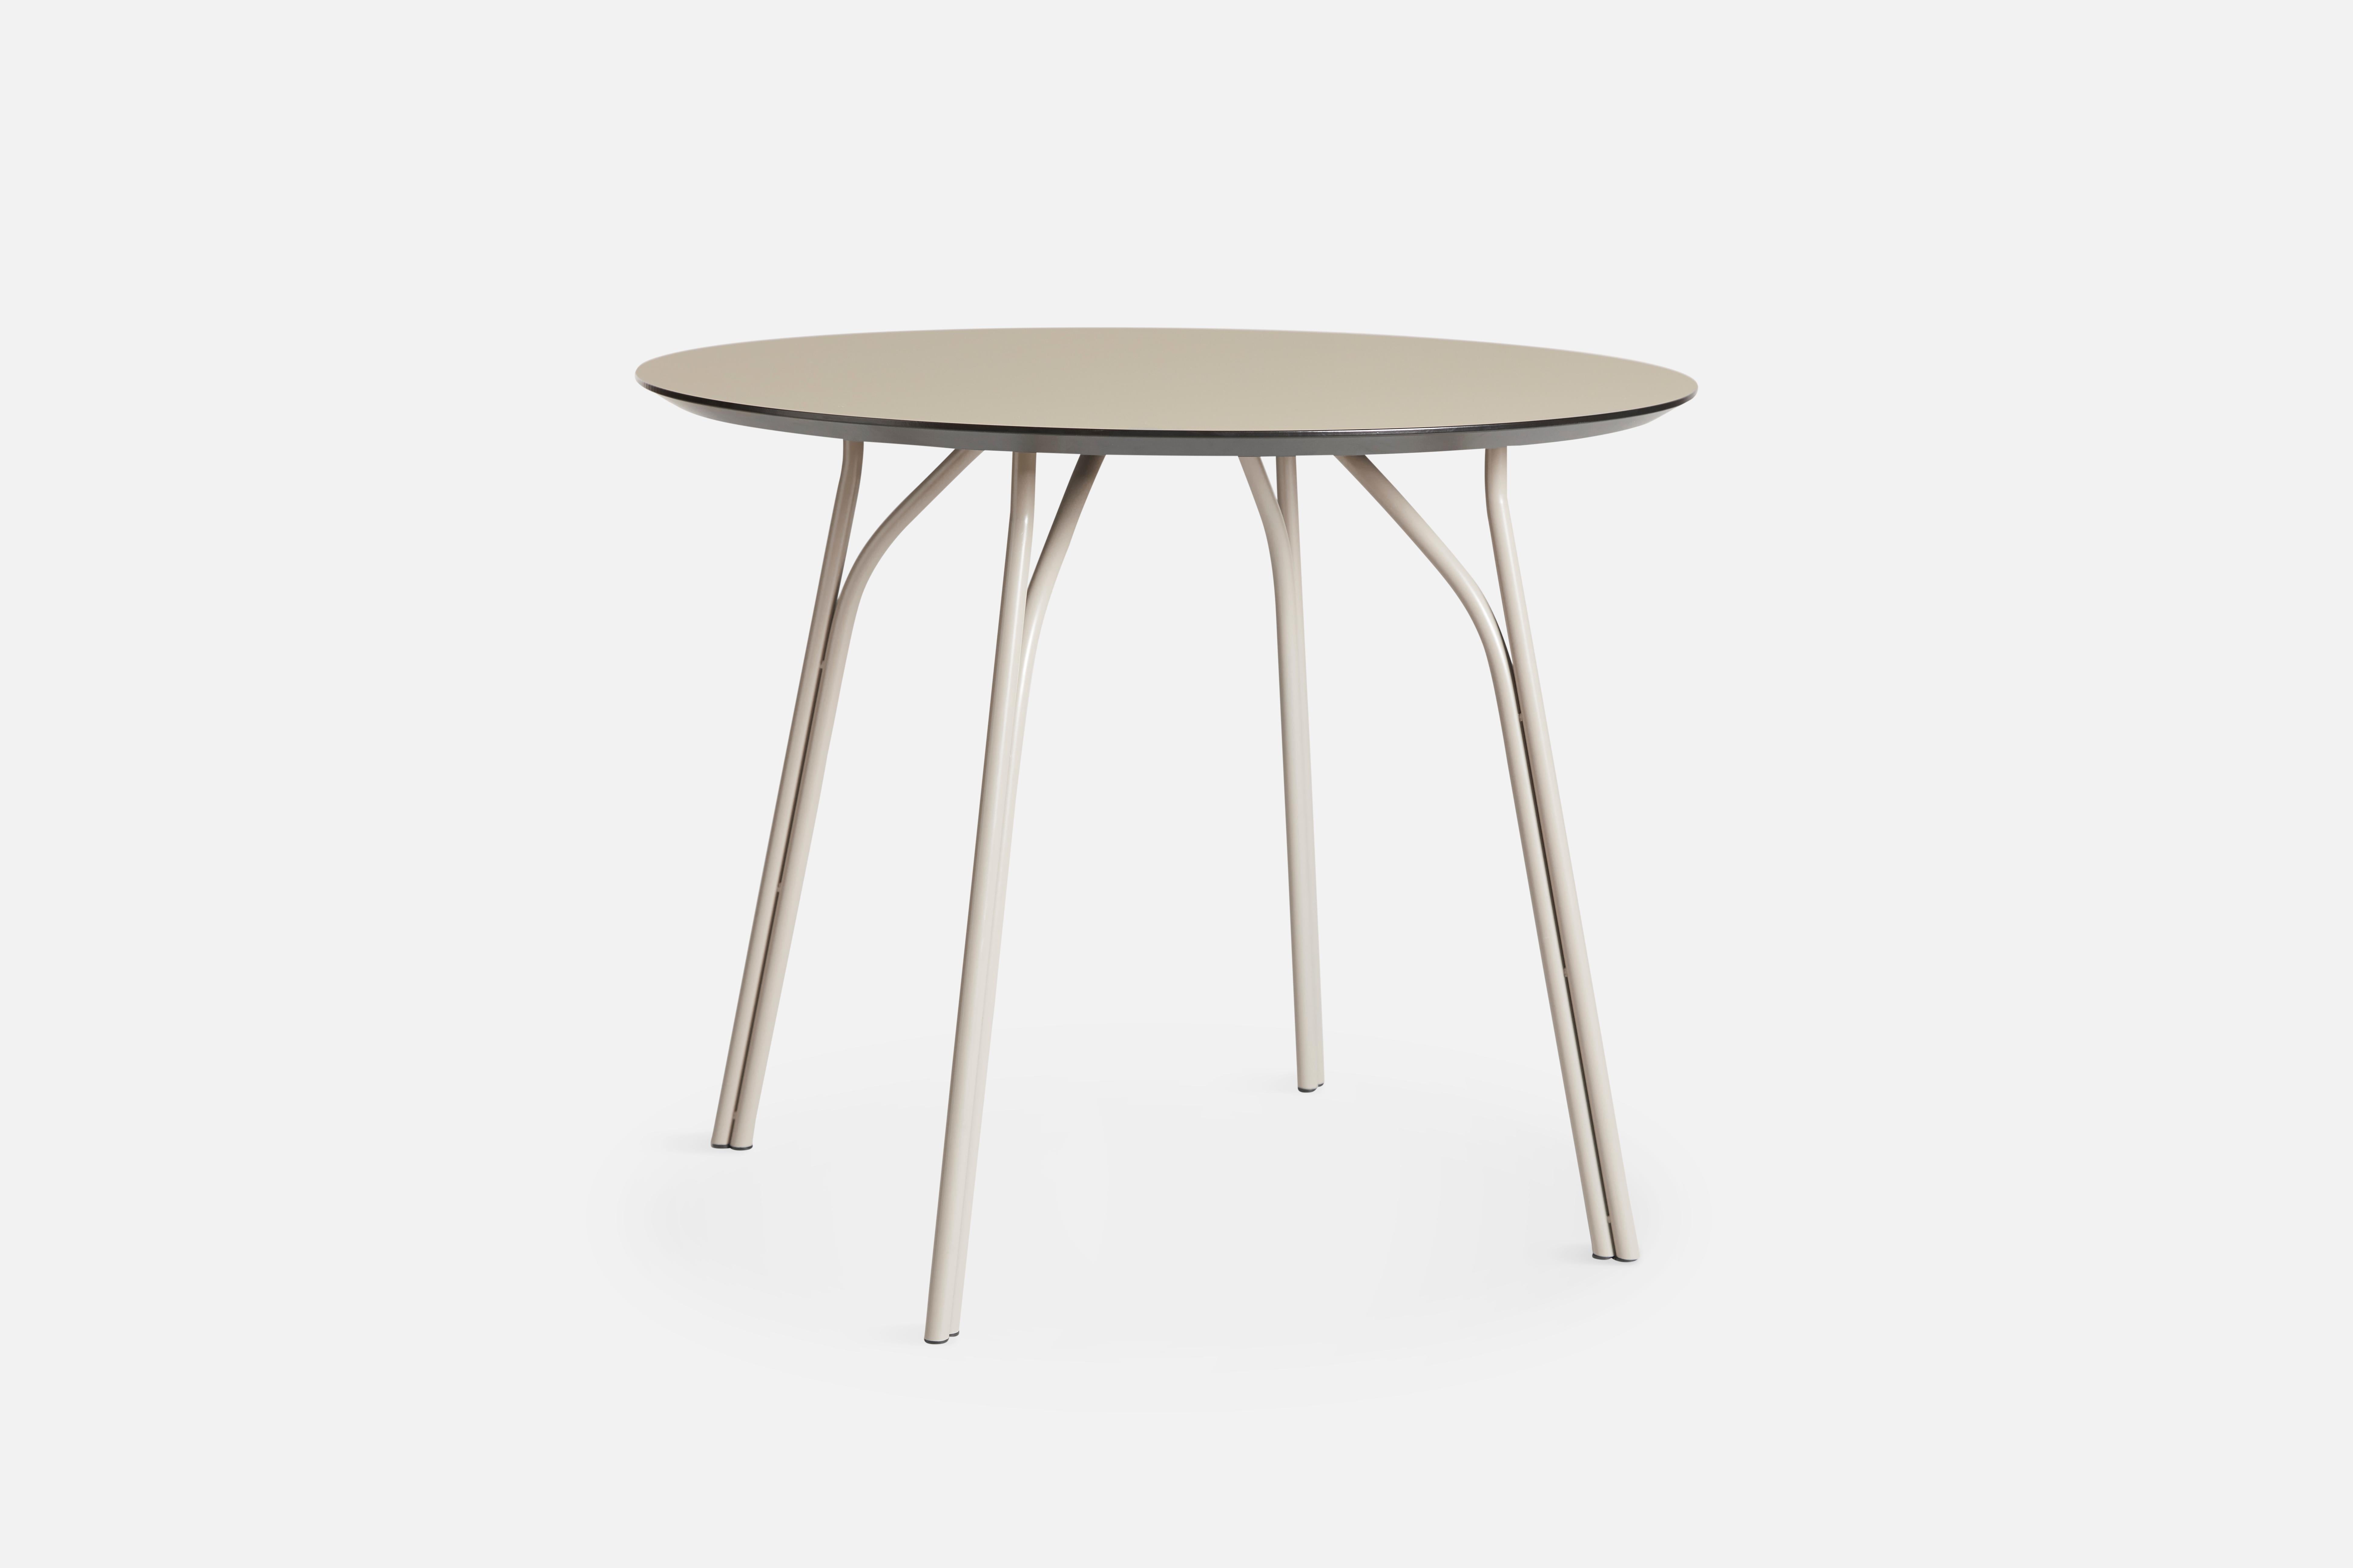 Tree small beige dining table by Elisabeth Hertzfeld.
Materials: Fenix laminate, metal.
Dimensions: D 90 x W 90 x H 74 cm.

The founders, Mia and Torben Koed, decided to put their 30 years of experience into a new project. It was time for a